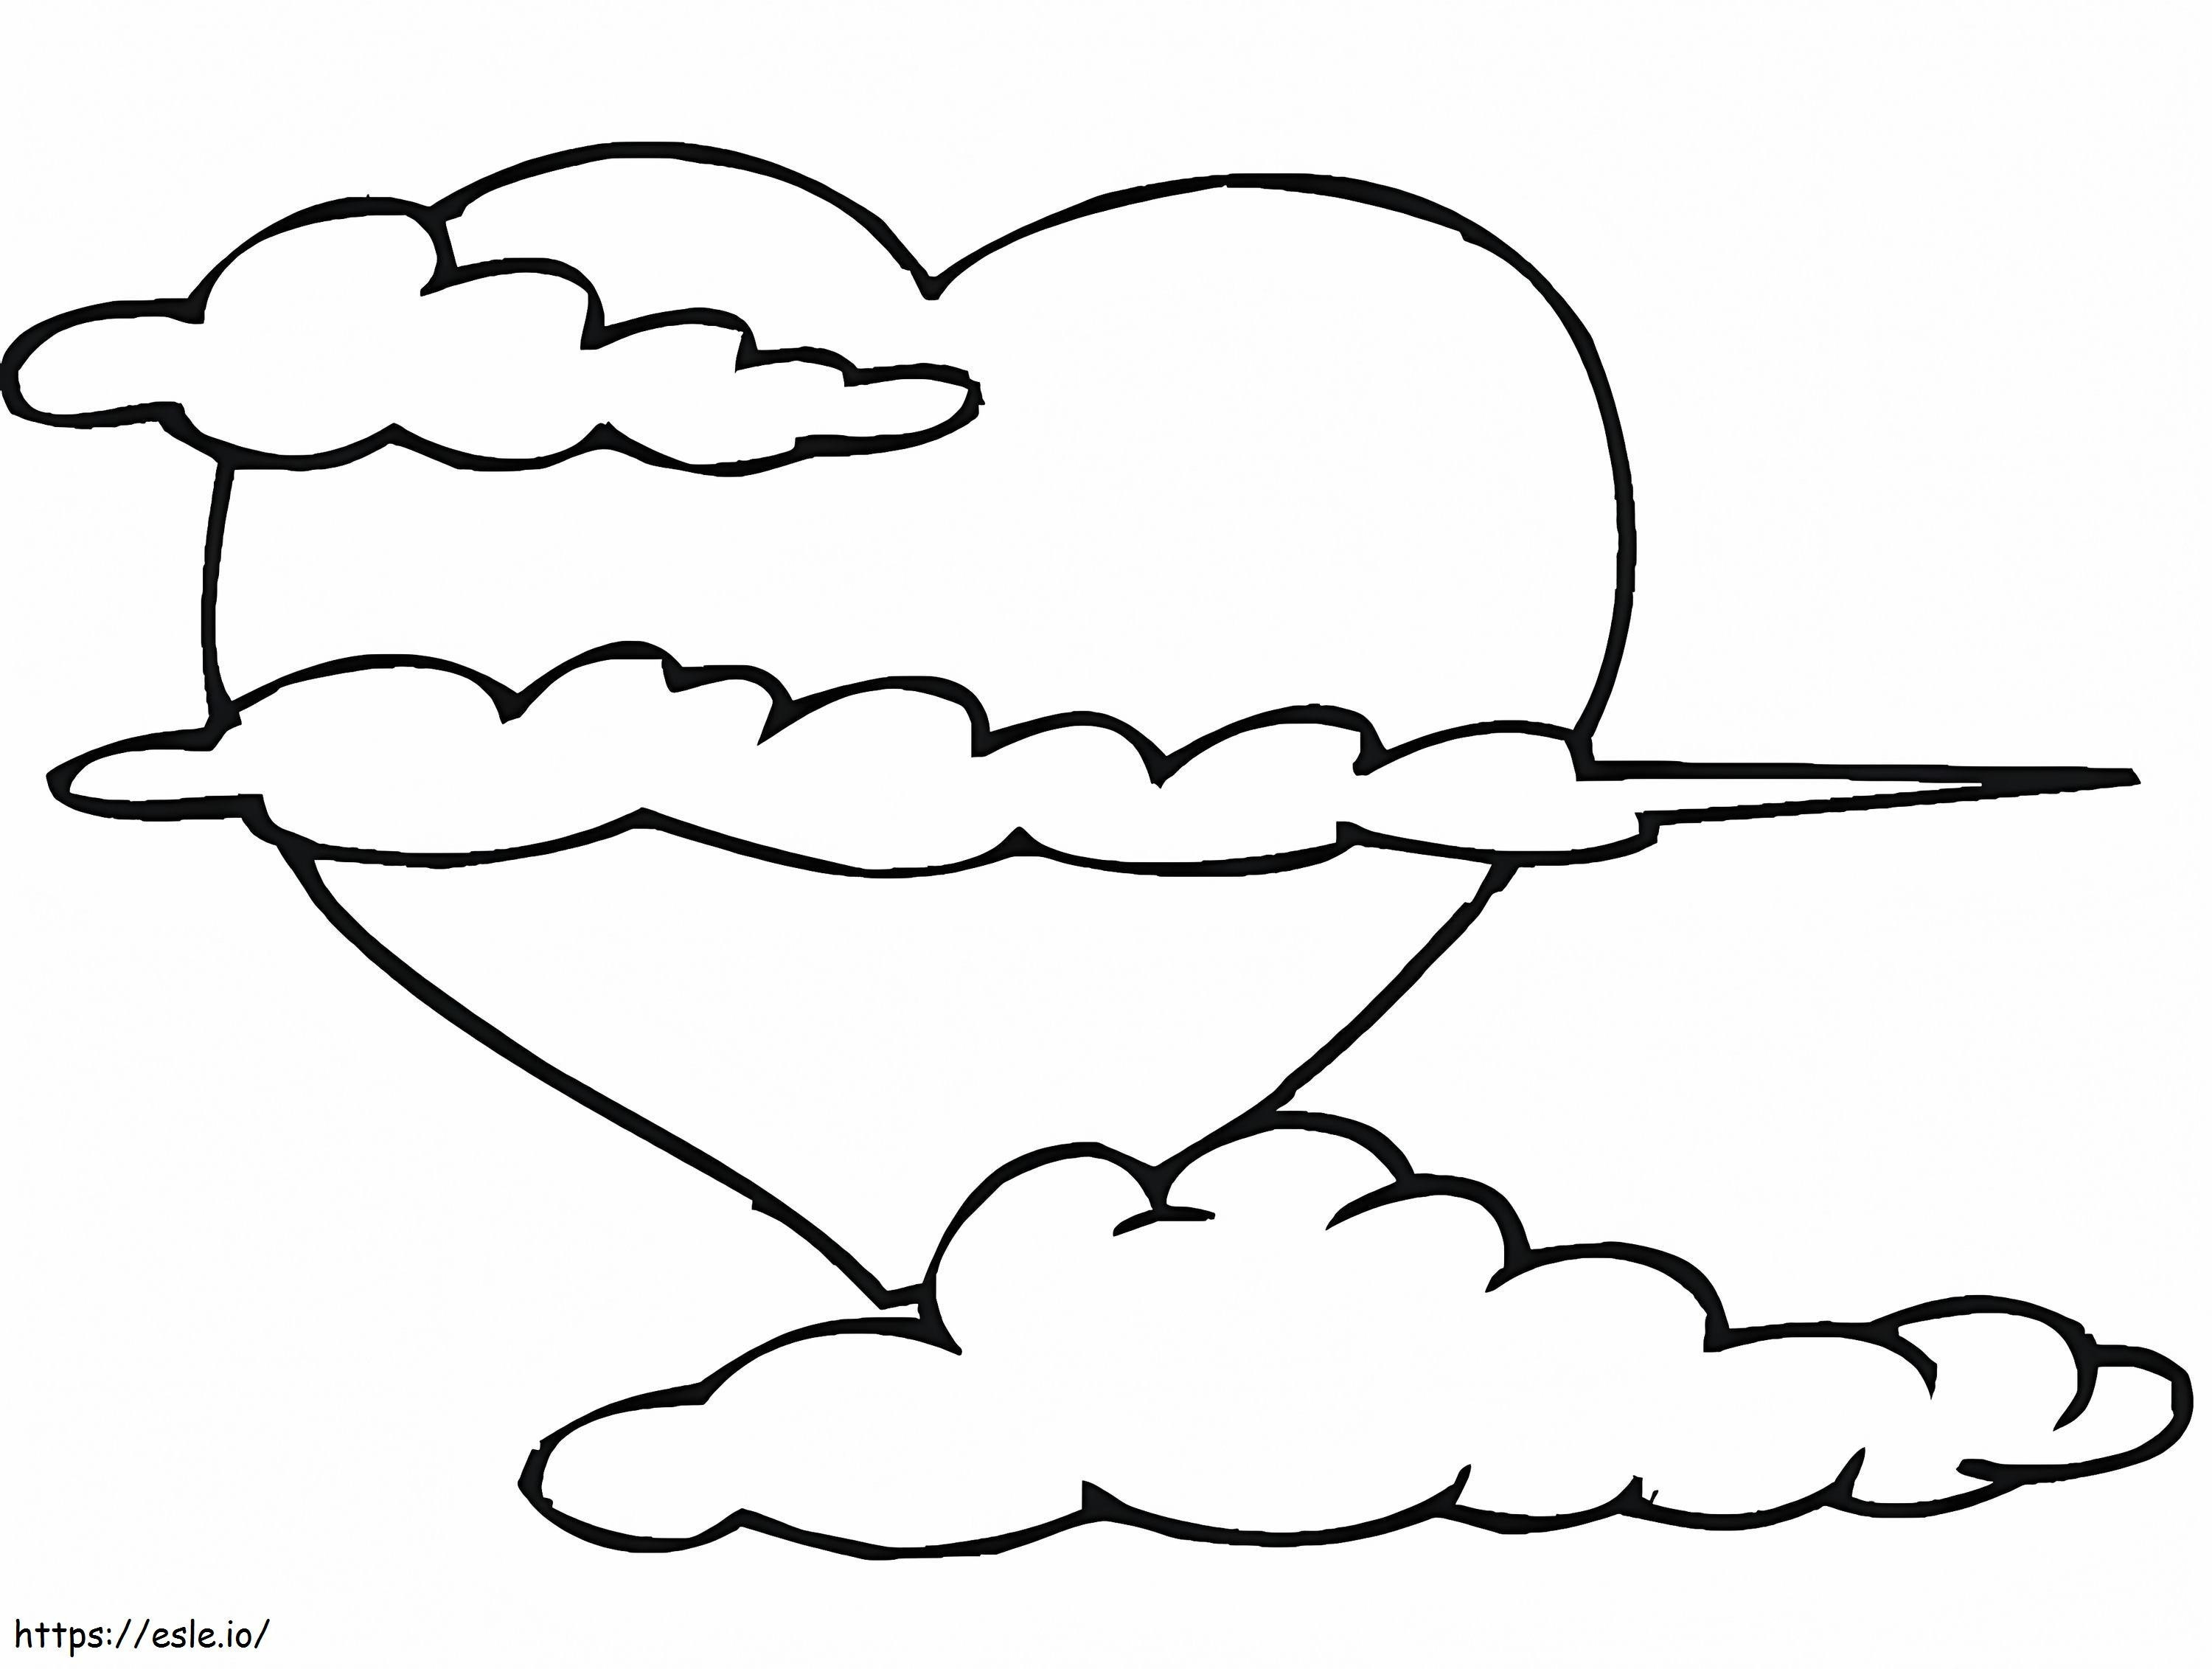 Heart And Clouds coloring page